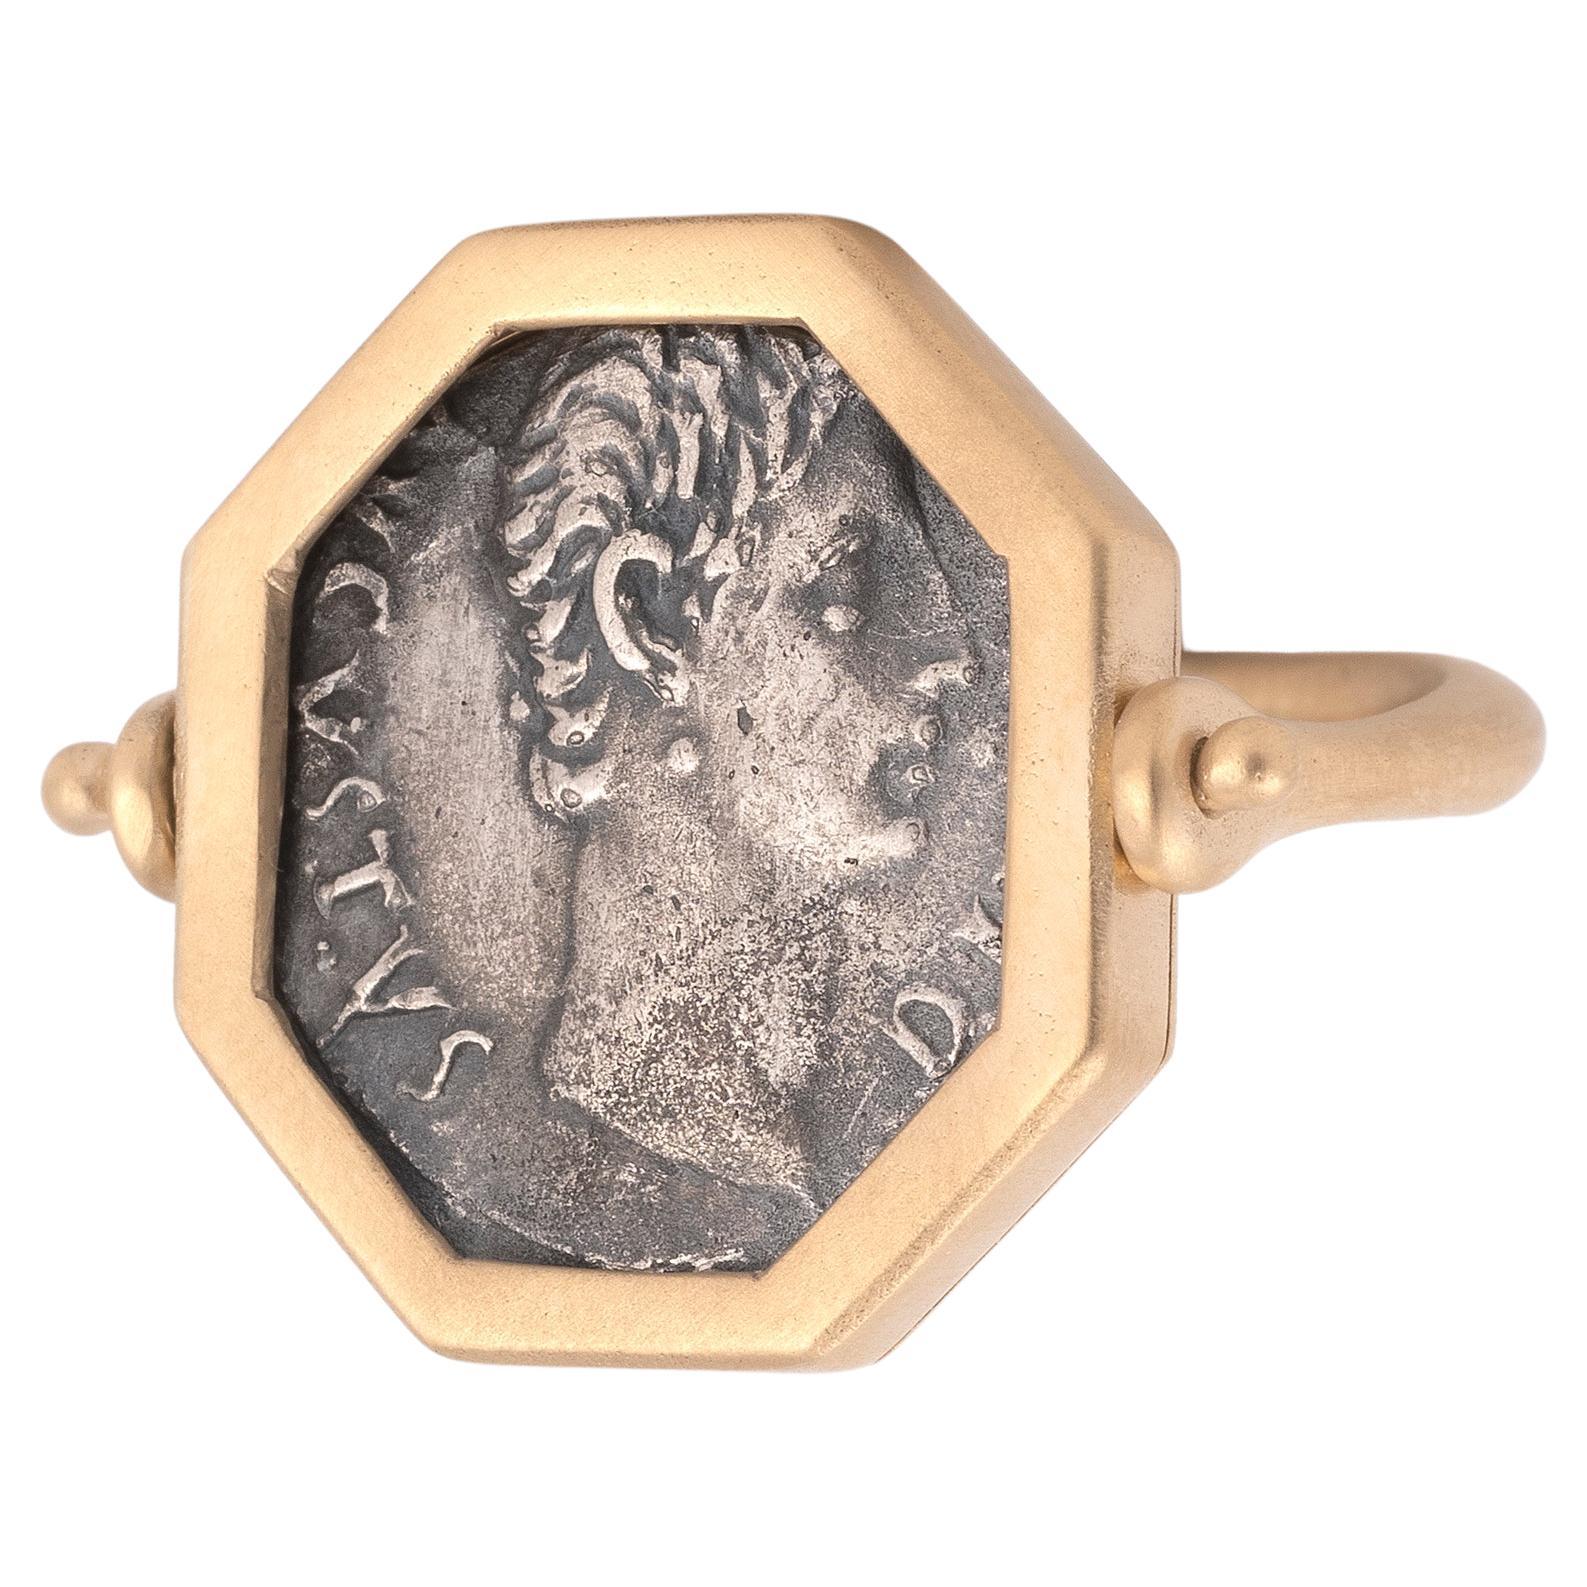 RING in 18kt yellow gold  with a pivoting octagonal bezel, set with a roman silver coin
AUGUSTO. Denario. Lugdunum (15-13 a.C.). R/ Toro a der.; IMP. X. FFC-108. SB-137.
18kt brushed gold.
Size : 7
Weight: 10,23gr.